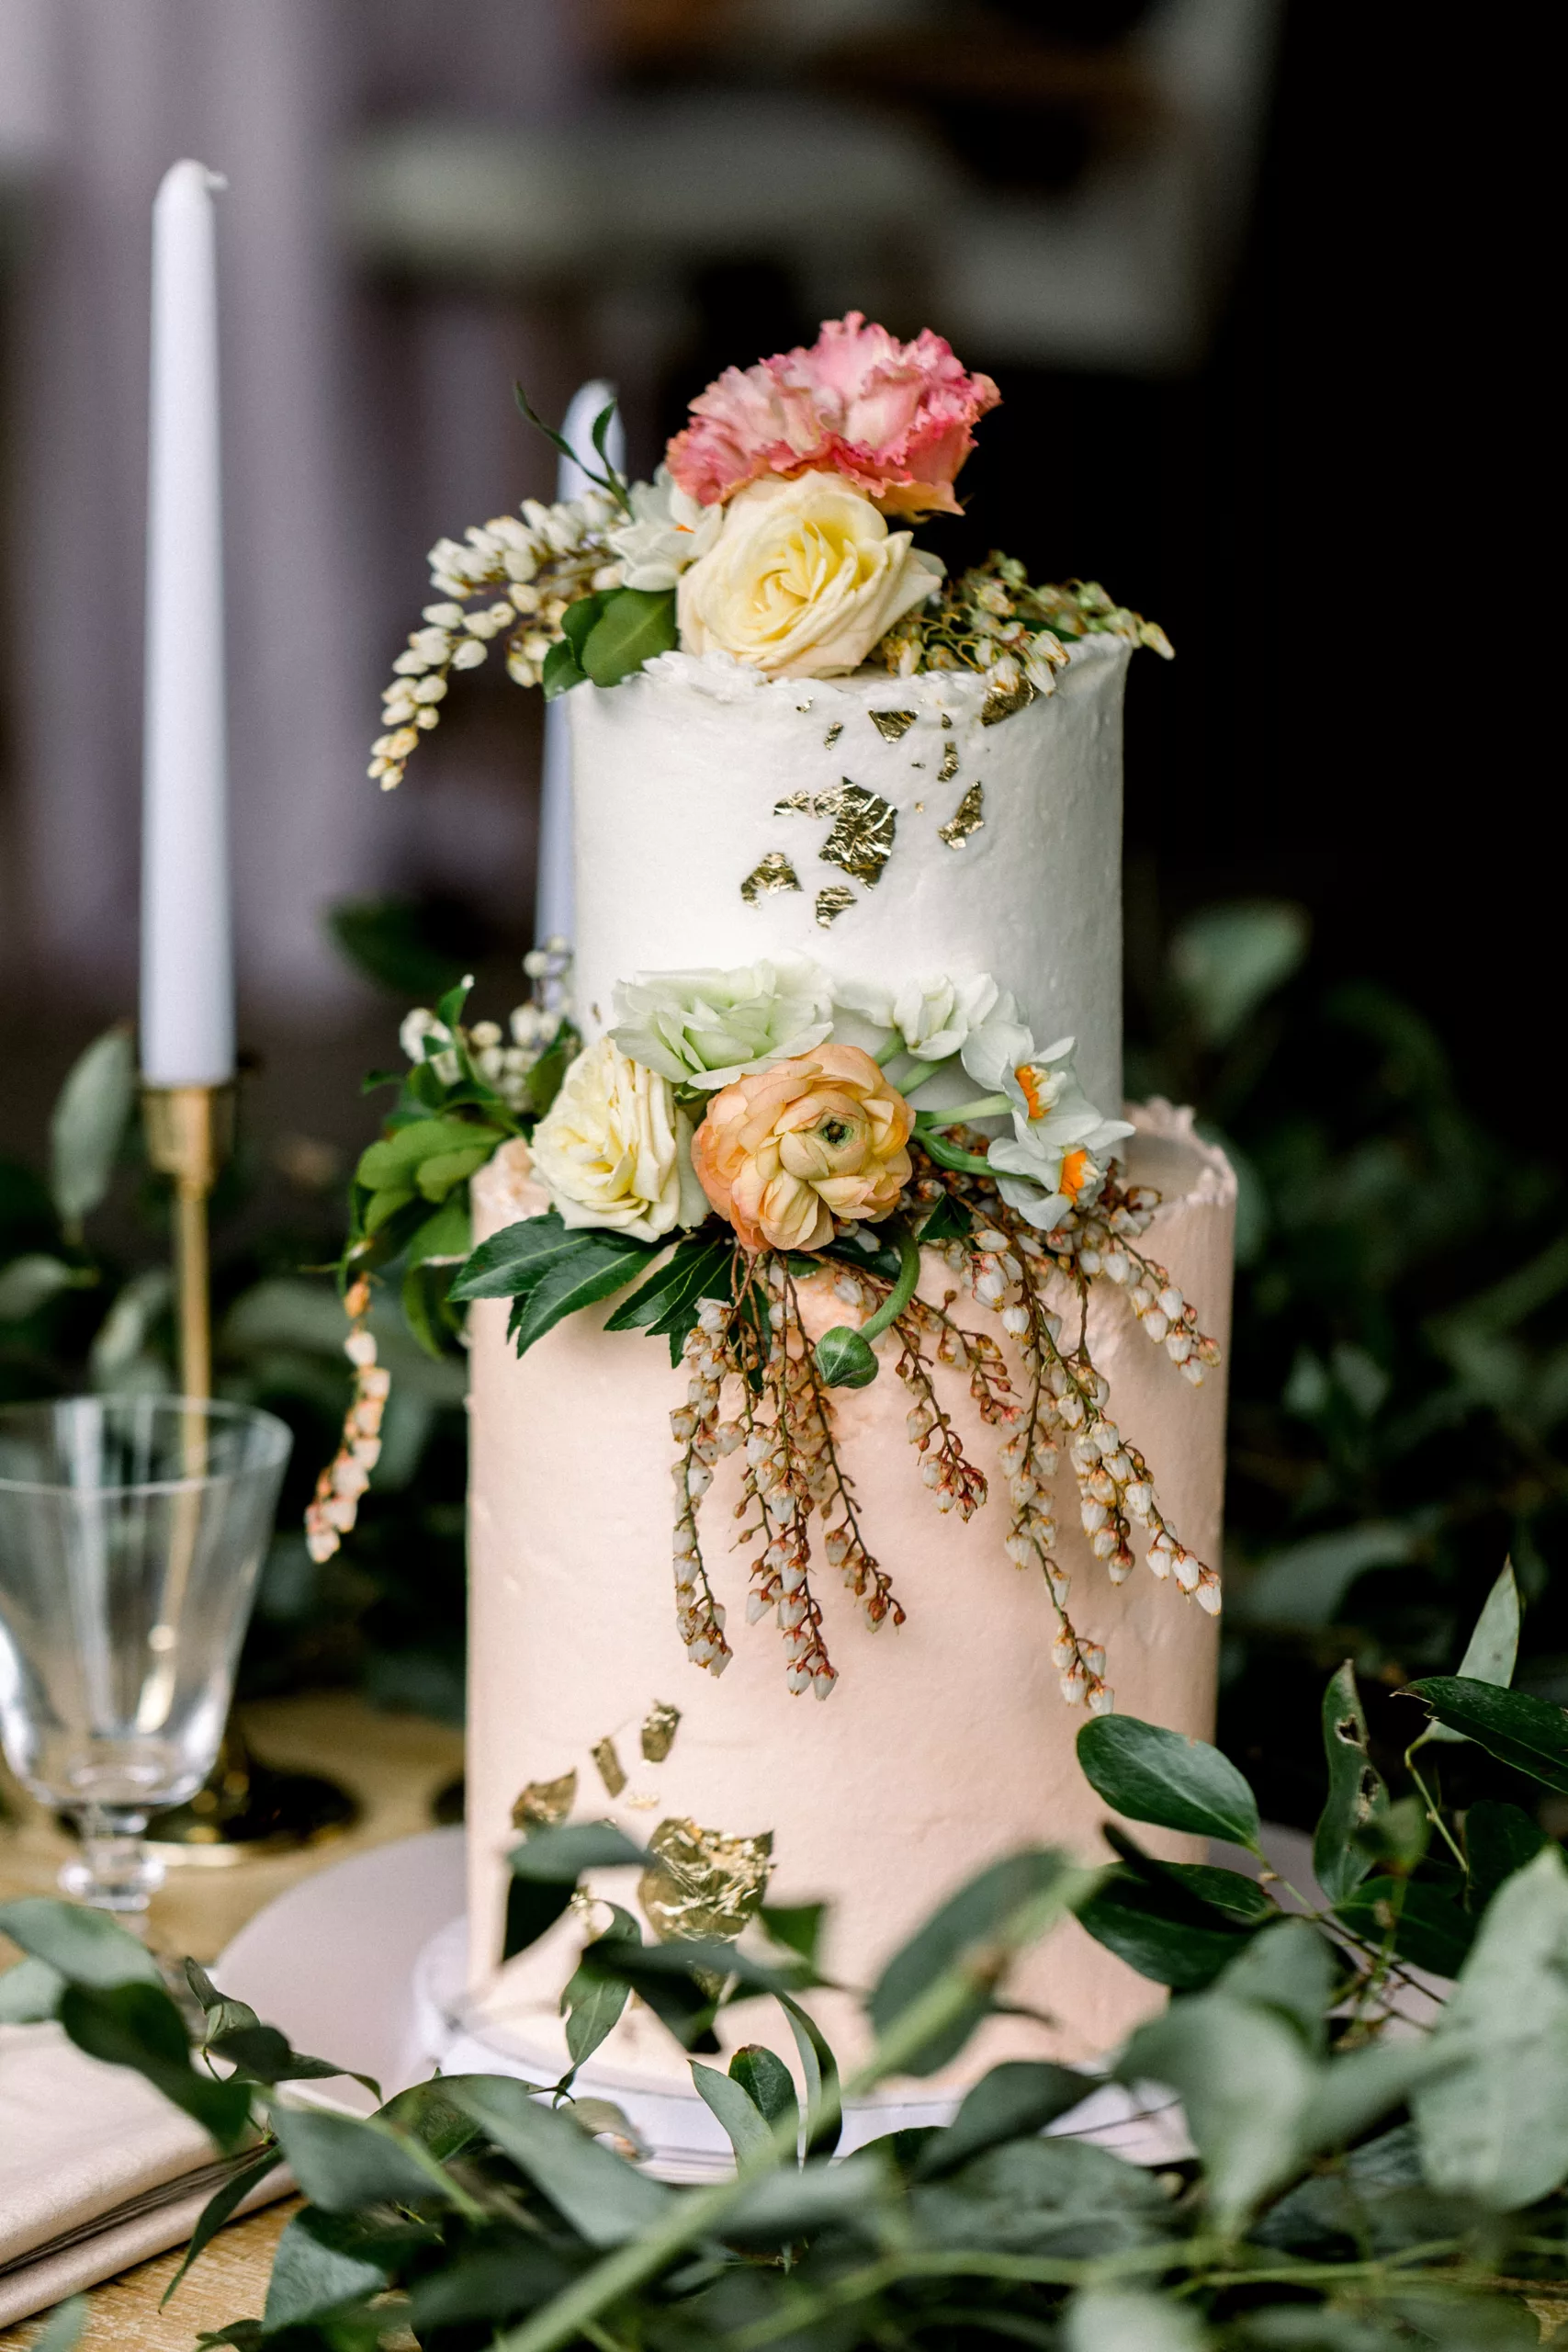 Details of a two tier wedding cake with florals and gold leaf